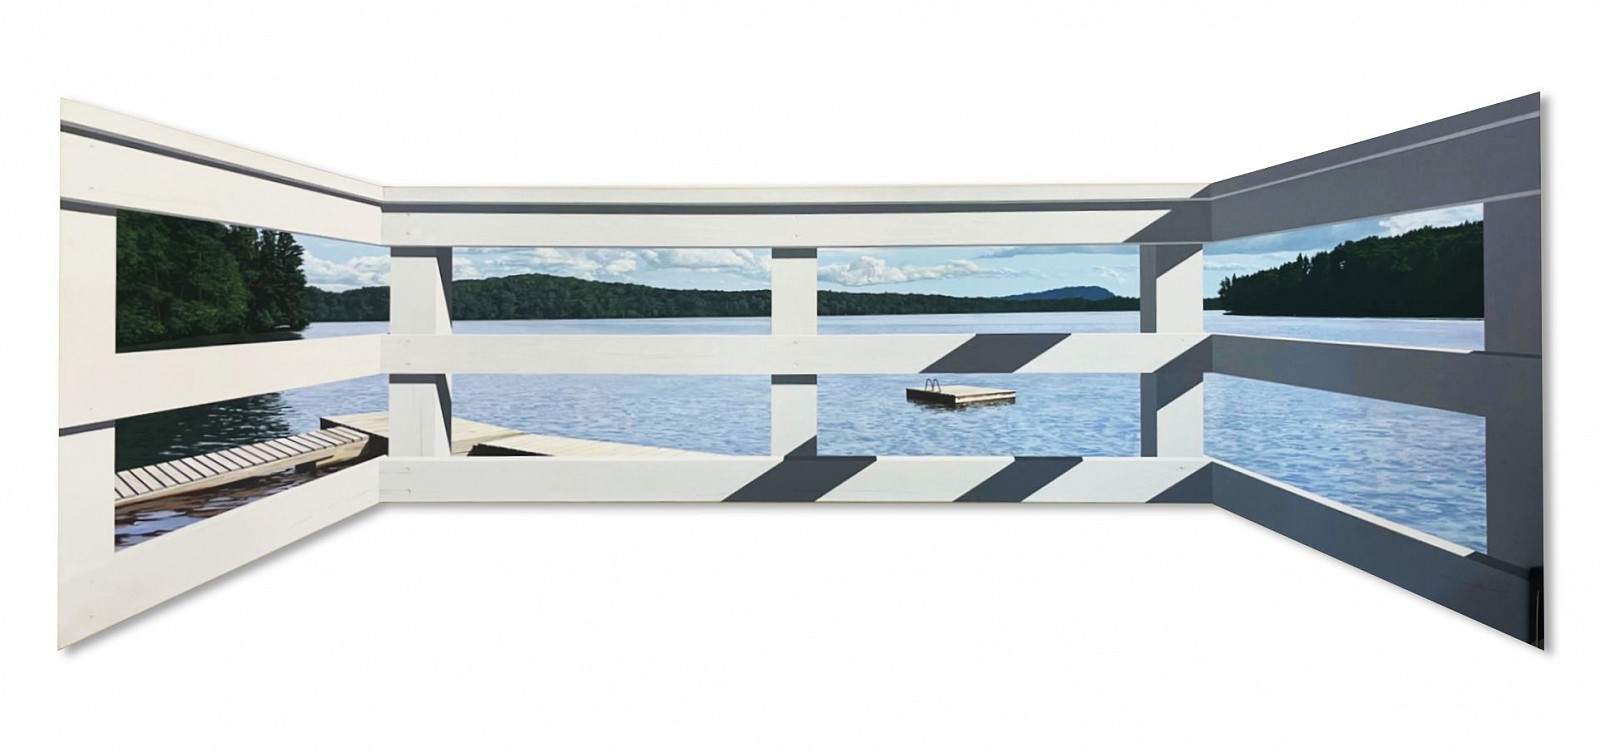 Warner Friedman, Lakefront, 1995
Acrylic on Shaped Canvas, 52 x 144 in.
FRIE00017